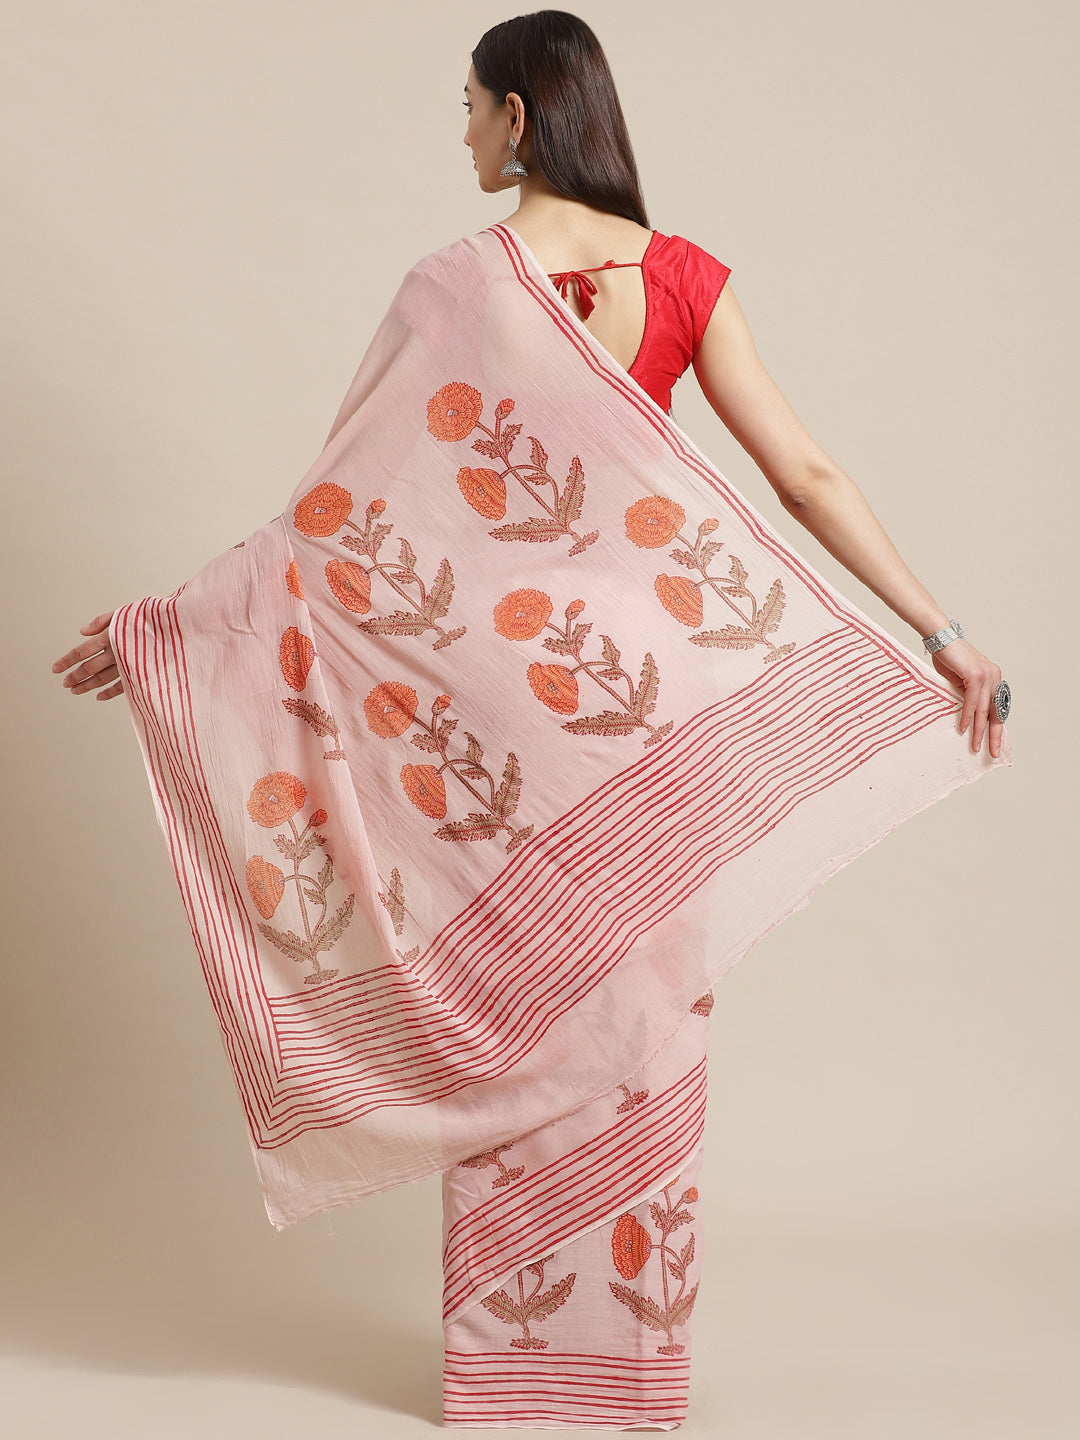 Peach and Pink, Kalakari India Cotton Peach Hand crafted saree with blouse HUPASA0015-Saree-Kalakari India-HUPASA0015-Cotton, Geographical Indication, Hand Block, Hand Crafted, Heritage Prints, Natural Dyes, Red, Sarees, Sustainable Fabrics, Woven, Yellow-[Linen,Ethnic,wear,Fashionista,Handloom,Handicraft,Indigo,blockprint,block,print,Cotton,Chanderi,Blue, latest,classy,party,bollywood,trendy,summer,style,traditional,formal,elegant,unique,style,hand,block,print, dabu,booti,gift,present,glamorous